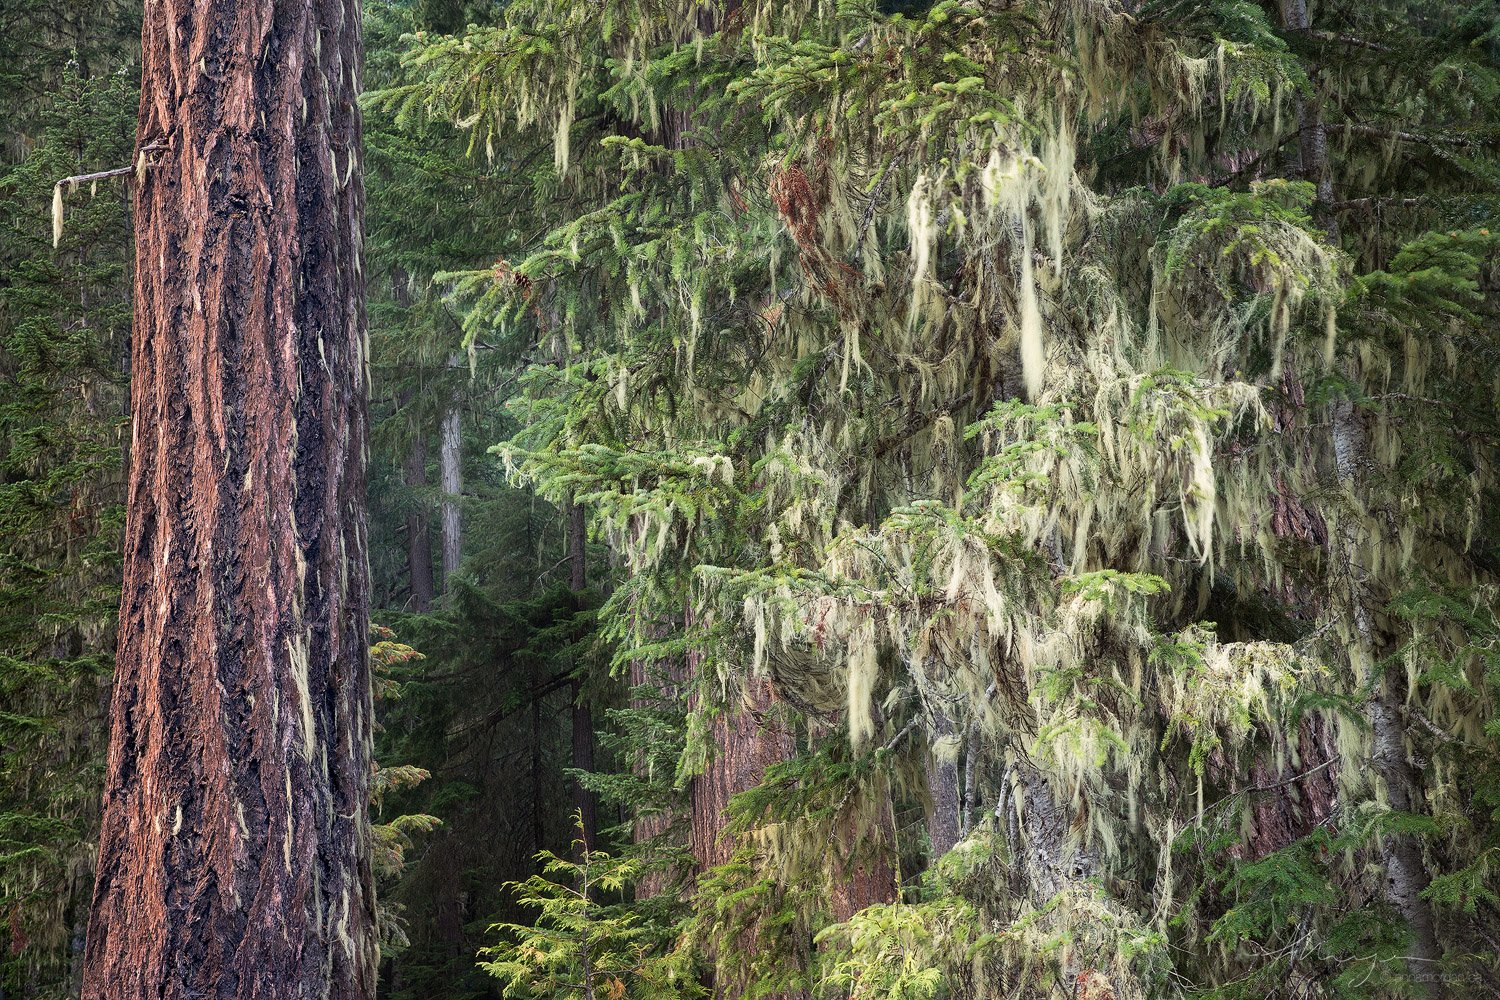 lichens hang from large trees in old growth temperate rainforest in Mount Rainier National Park